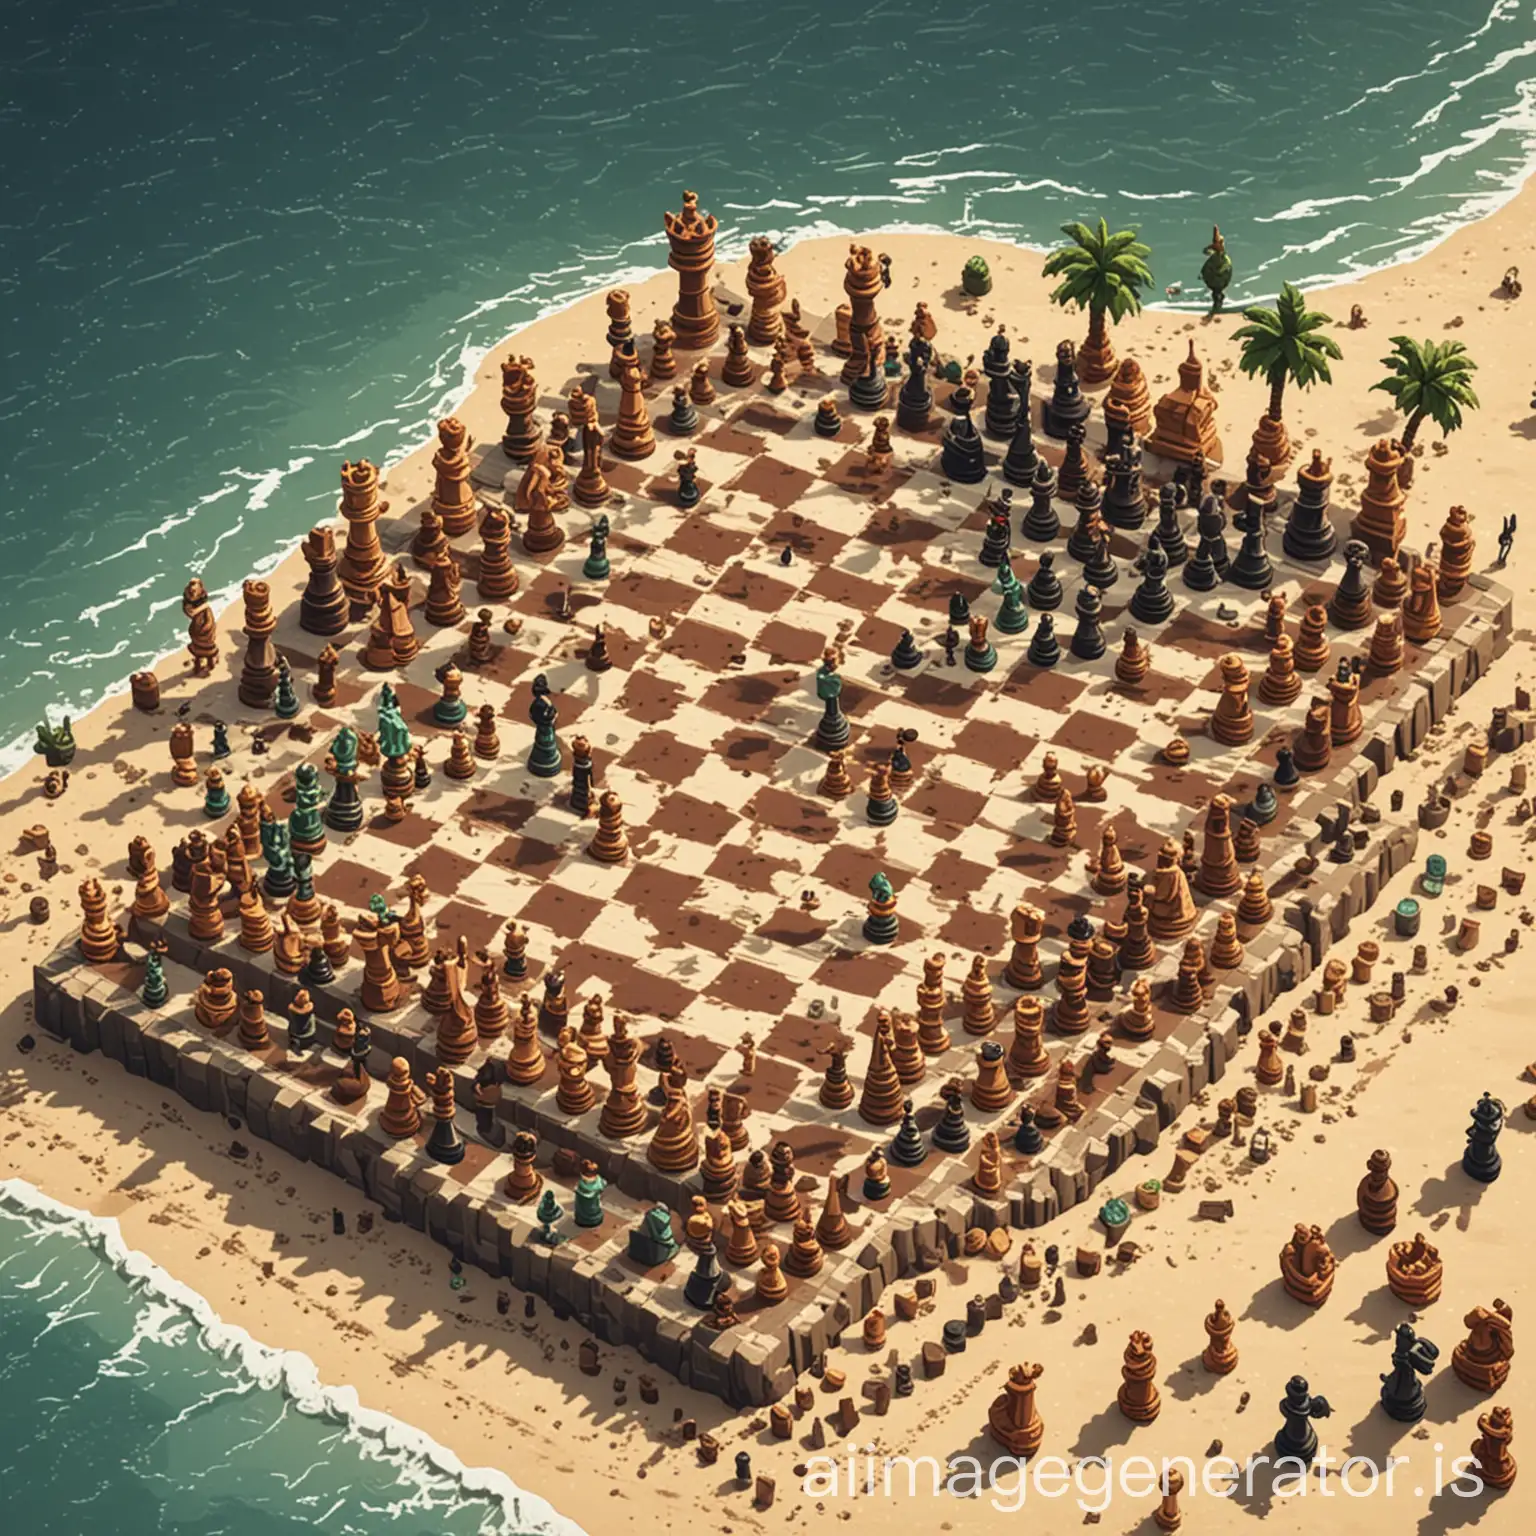 musical chess in an island beach in pixel art style, but take carae that the chess board is 8x8 squares